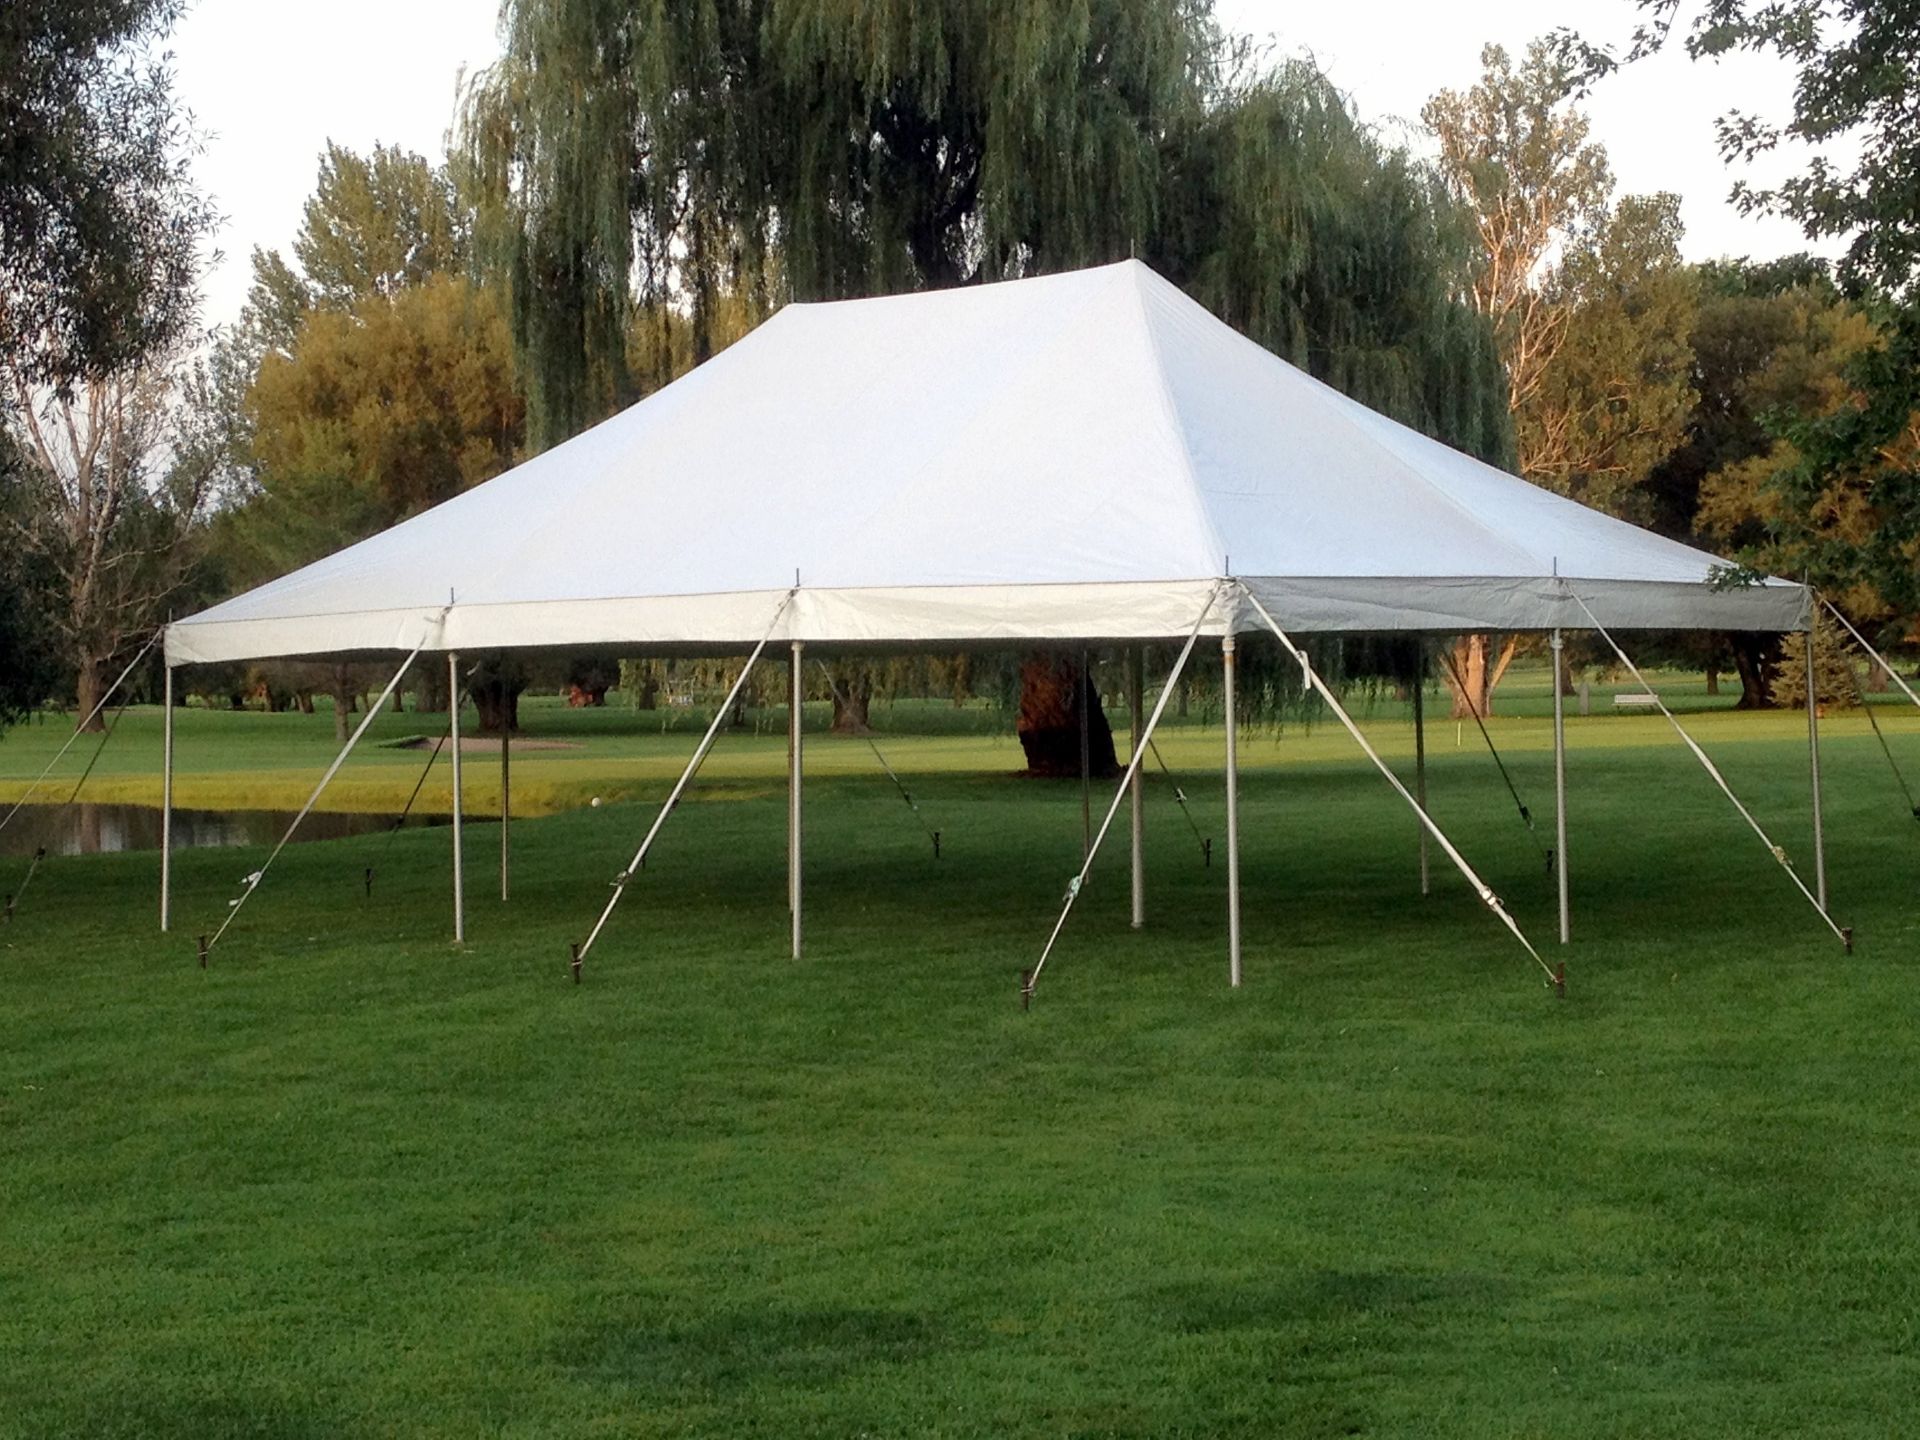 20' x 30' Party Tent - Complete Tent Setup with Poles